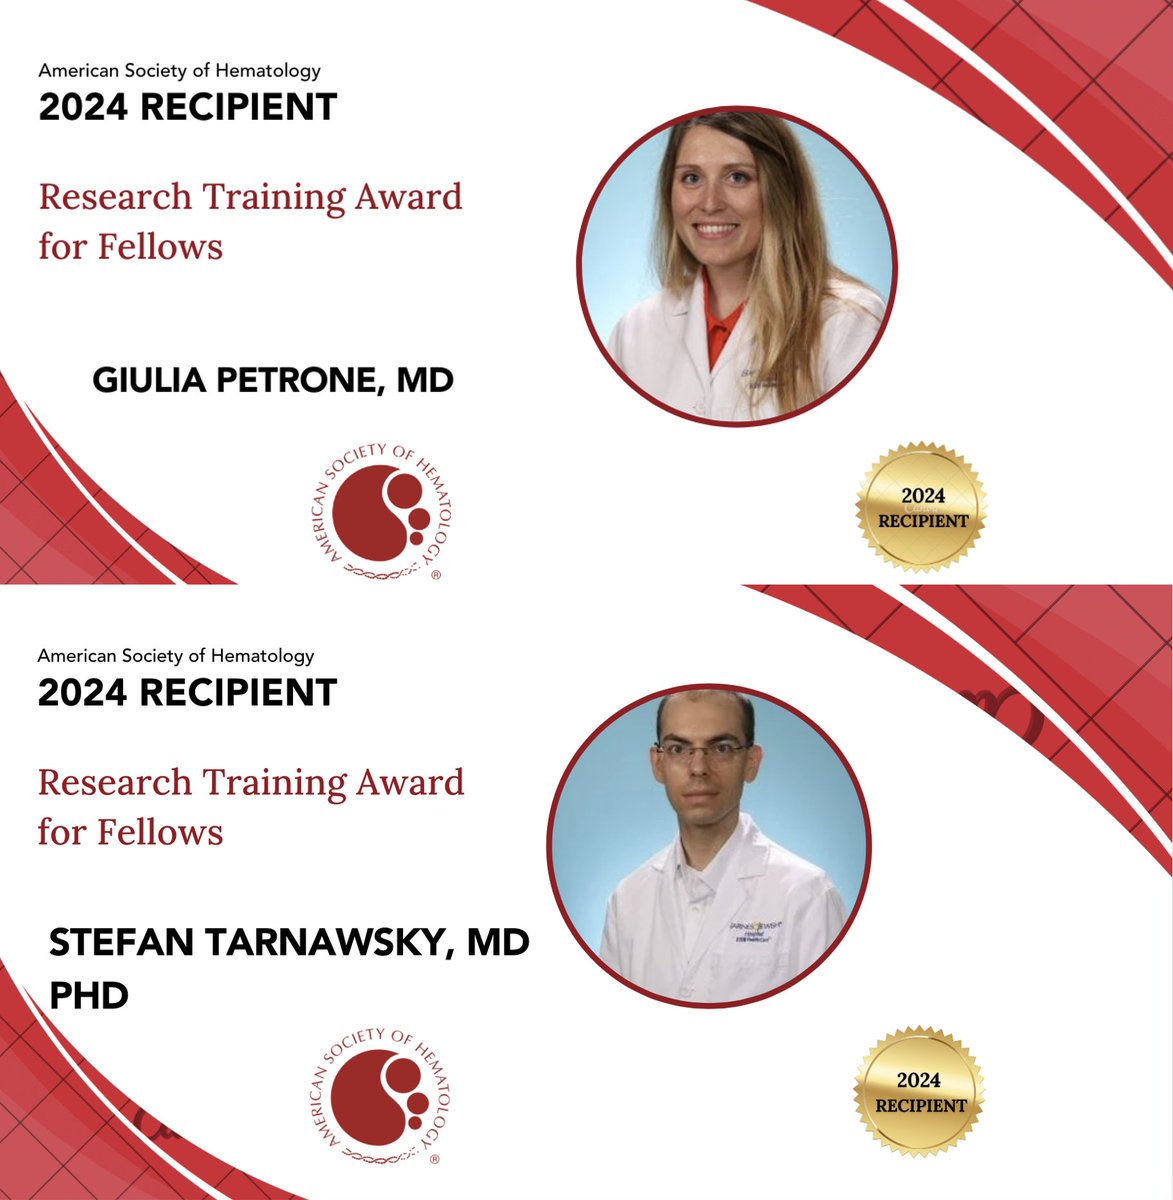 Congratulations to our very own Giulia Petrone MD and Stefan Tarnawsky MD,PhD for being selected by @ASH_hematology to receive the Research Training Award for Fellows (RTAF)! 🙌🌟 So proud of you and here's to many more! @WUHemeOncFellow #ASHAwards